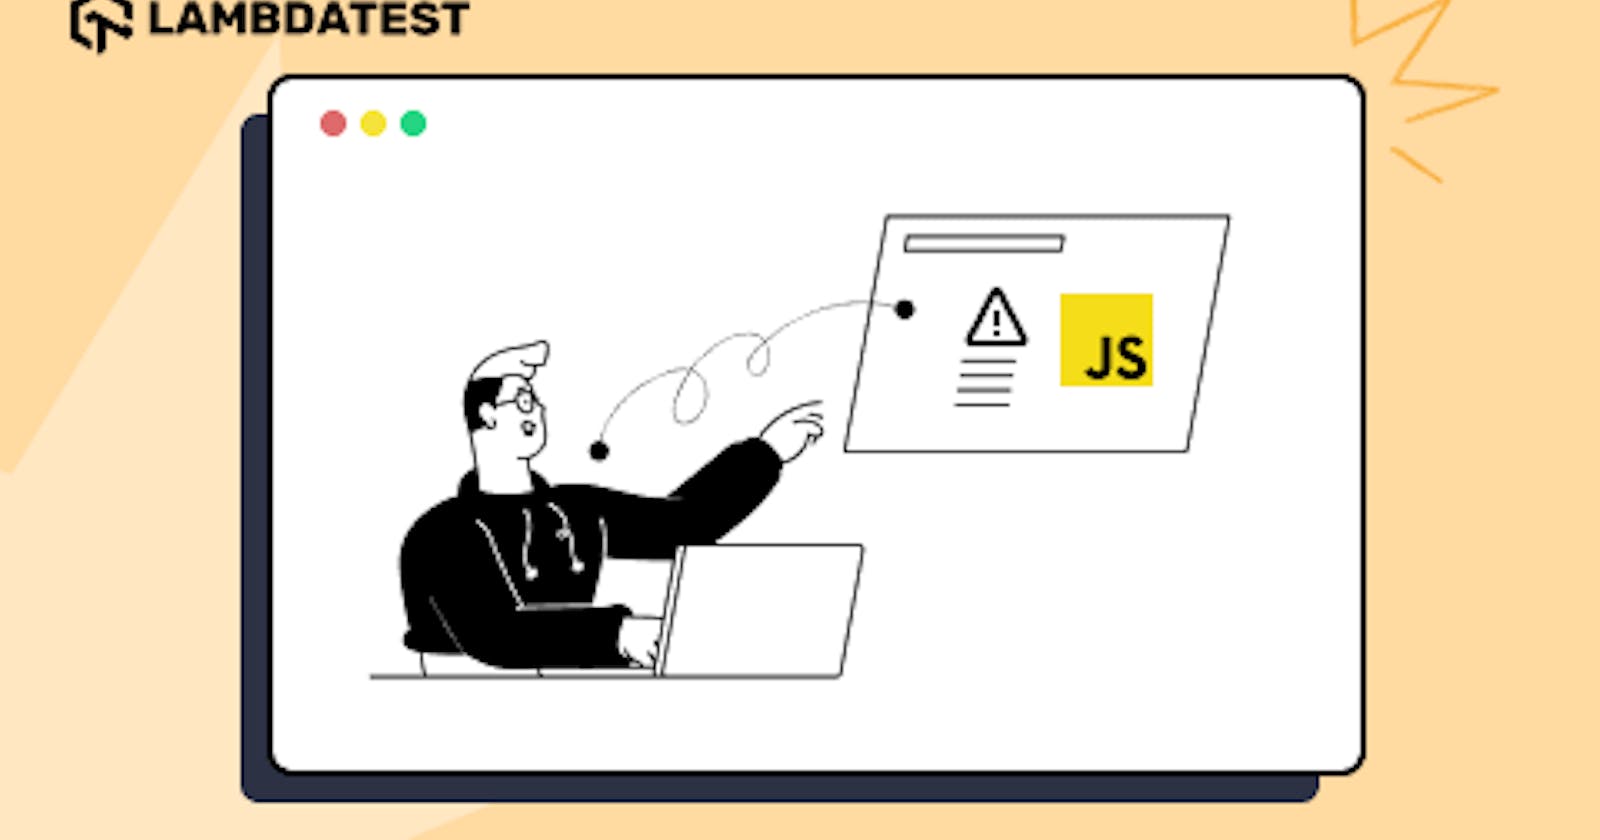 Common JavaScript Errors and How To Handle Them